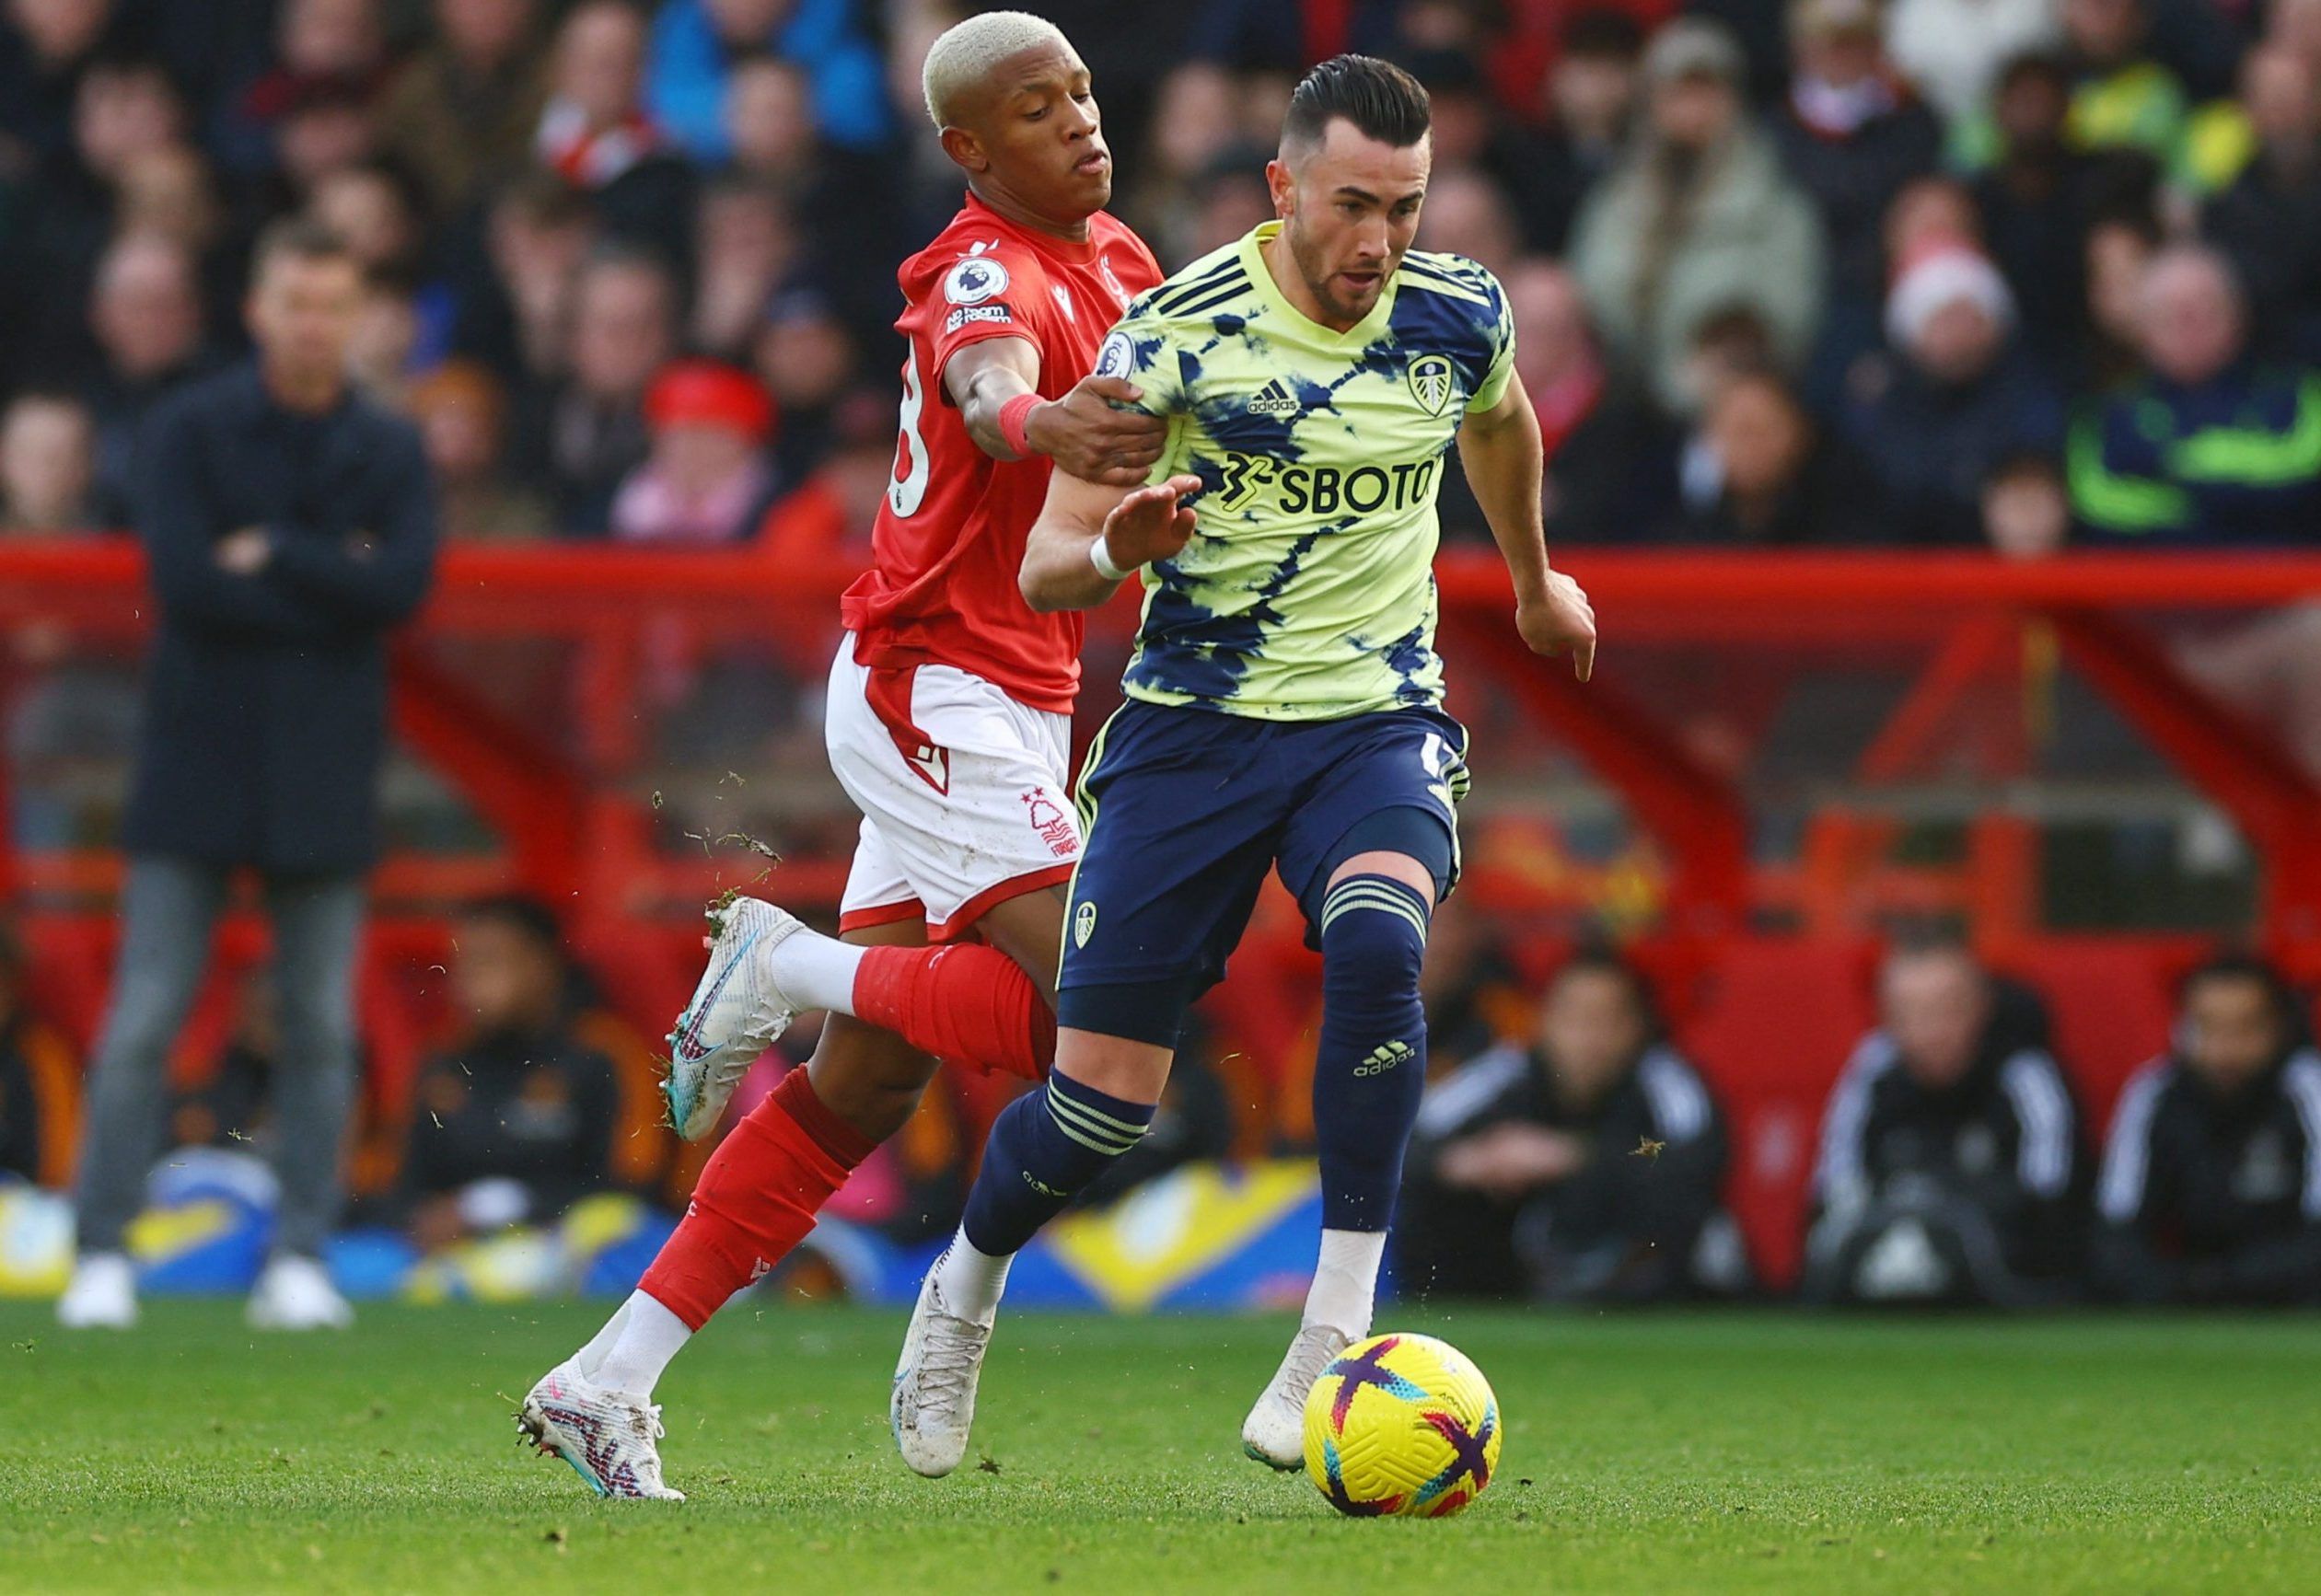 Soccer Football - Premier League - Nottingham Forest v Leeds United - The City Ground, Nottingham, Britain - February 5, 2023 Nottingham Forest's Danilo in action with Leeds United's Jack Harrison REUTERS/Carl Recine EDITORIAL USE ONLY. No use with unauthorized audio, video, data, fixture lists, club/league logos or 'live' services. Online in-match use limited to 75 images, no video emulation. No use in betting, games or single club /league/player publications.  Please contact your account repre